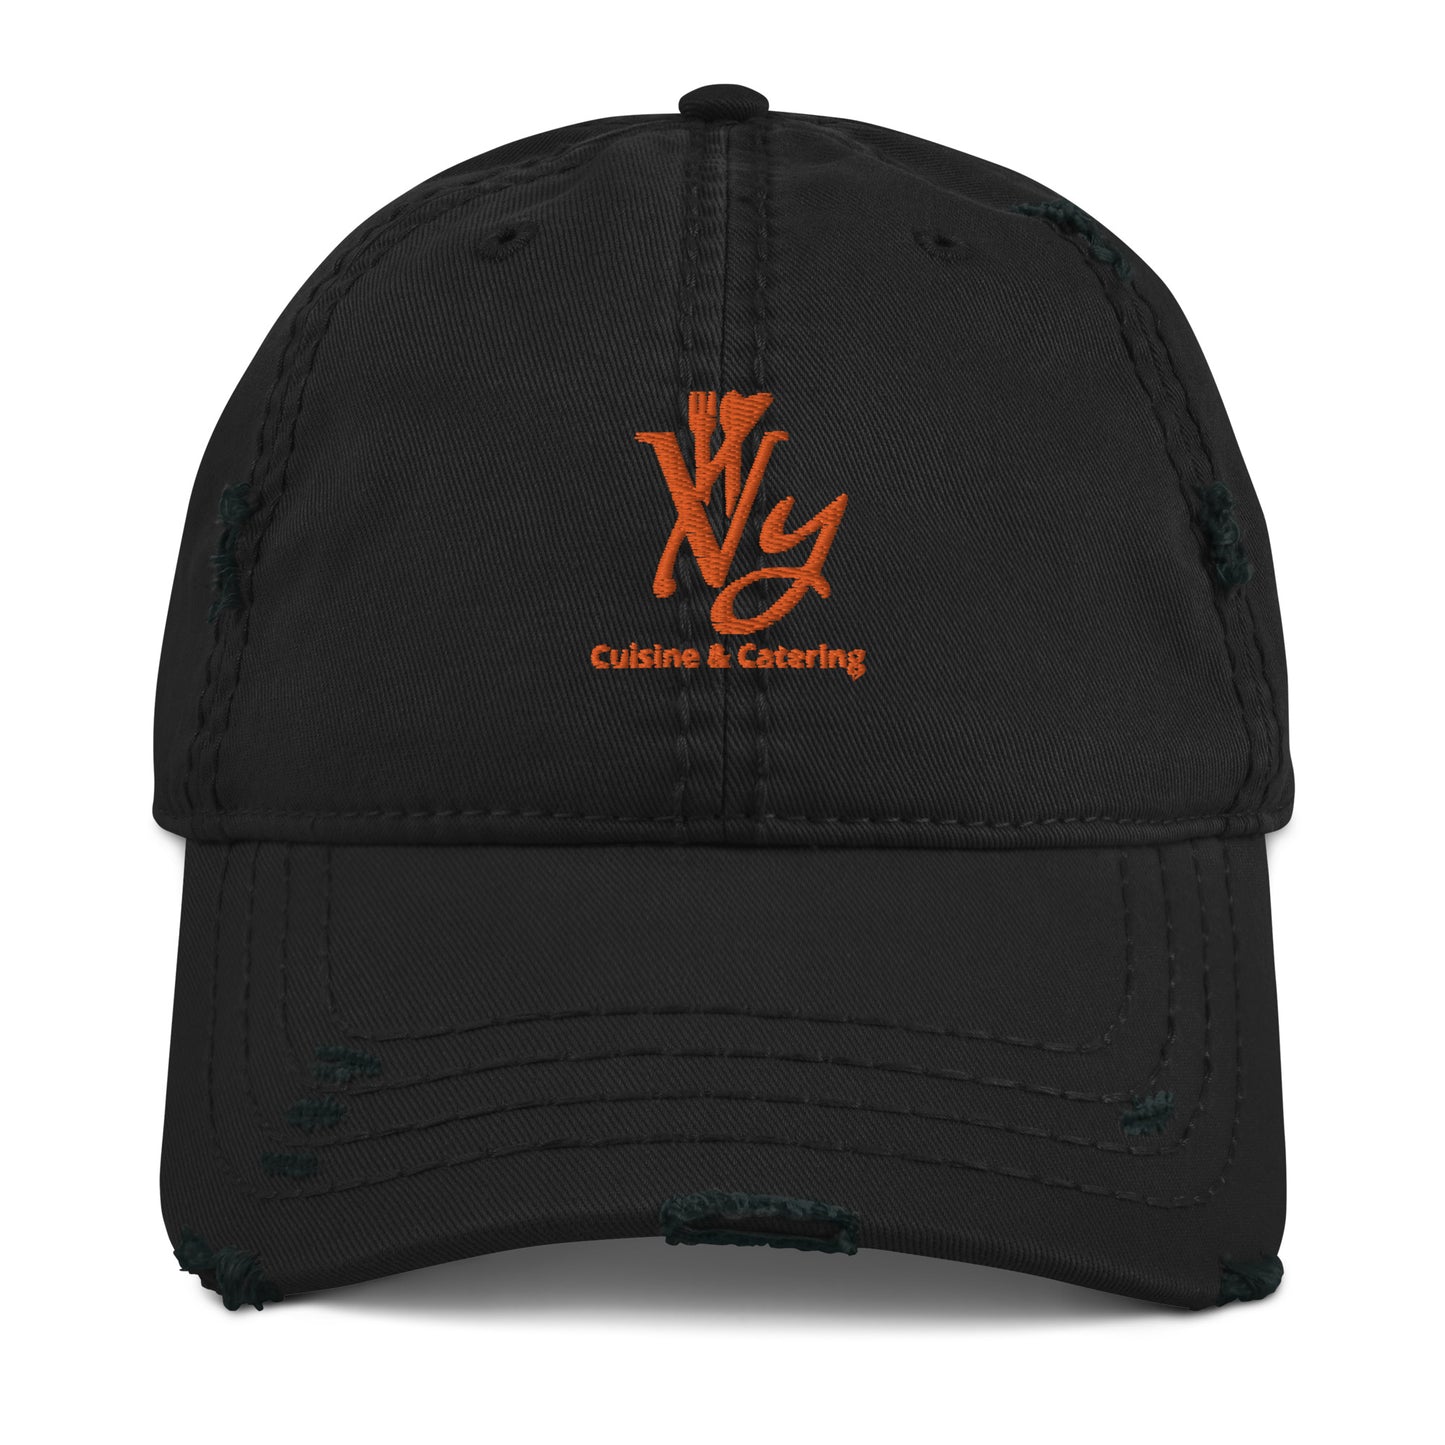 Ivy Cuisine & Catering Distressed Dad Hat